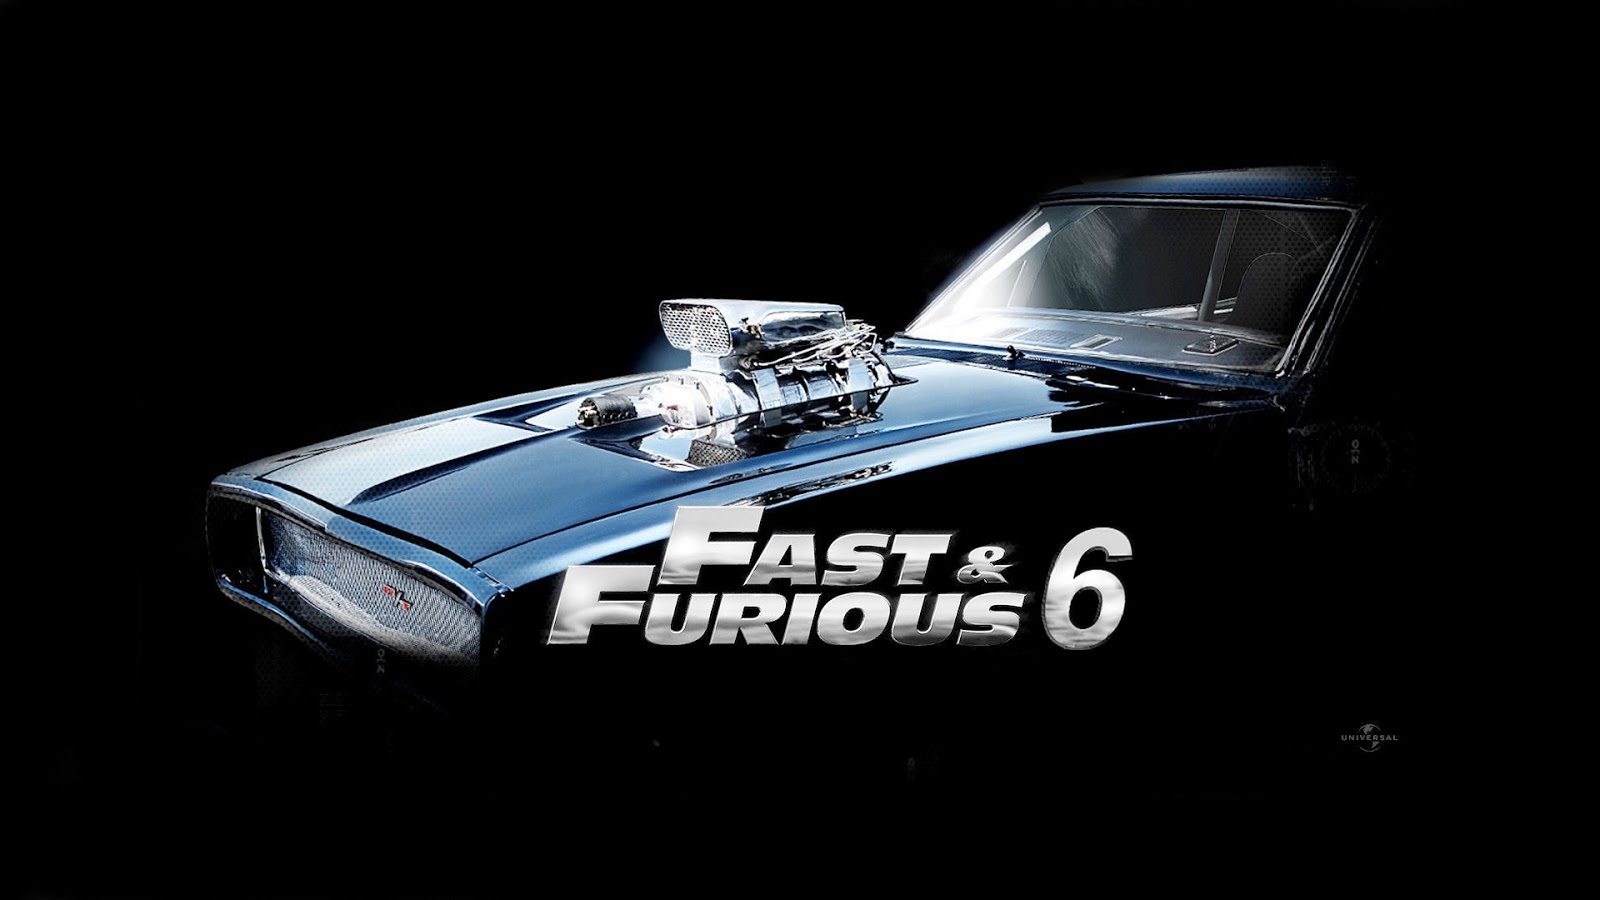 Fast And Furious HD Wallpaper 1080p High